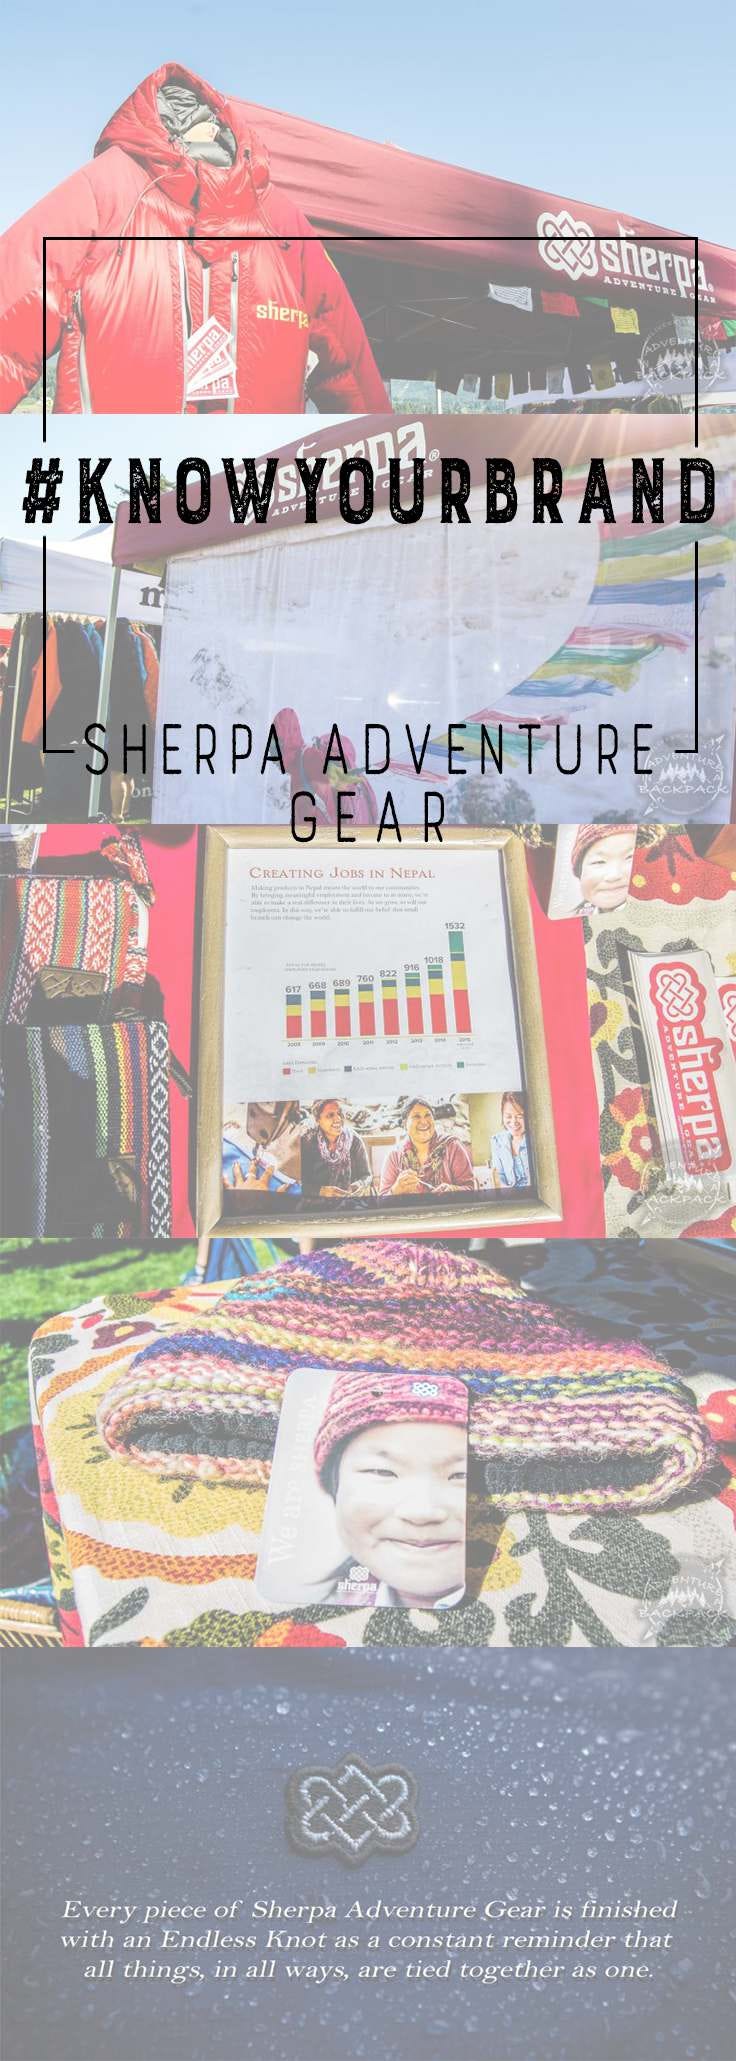 Sherpa adventure gear is more than just outerwear.  They actually help the sherpa culture by employing those involved in the culture but are not mountain guides at a fair wage and good working conditions.  outdoor gear | Jackets | Ski Jackets | Snowboard Jackets | Ski outfits | snowboard outfits